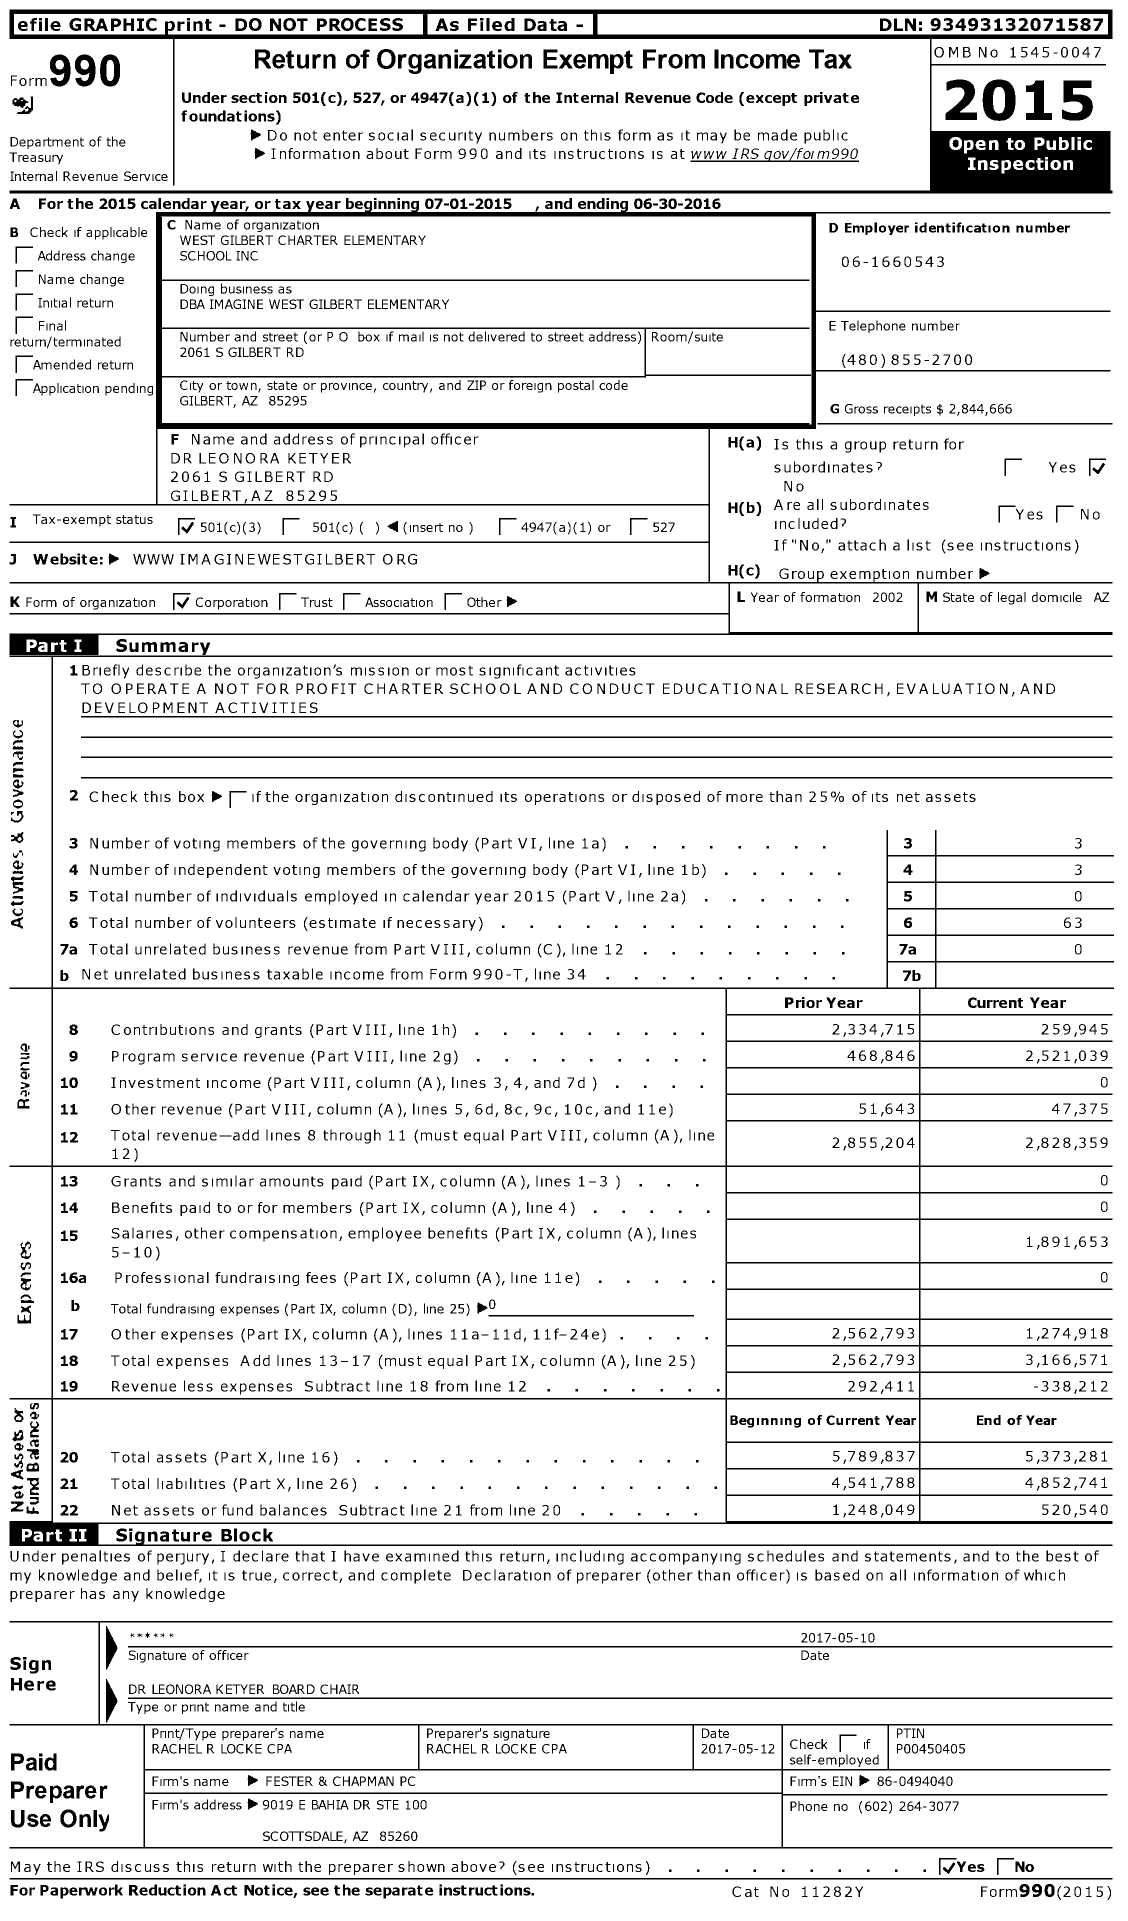 Image of first page of 2015 Form 990 for Imagine West Gilbert Elementary